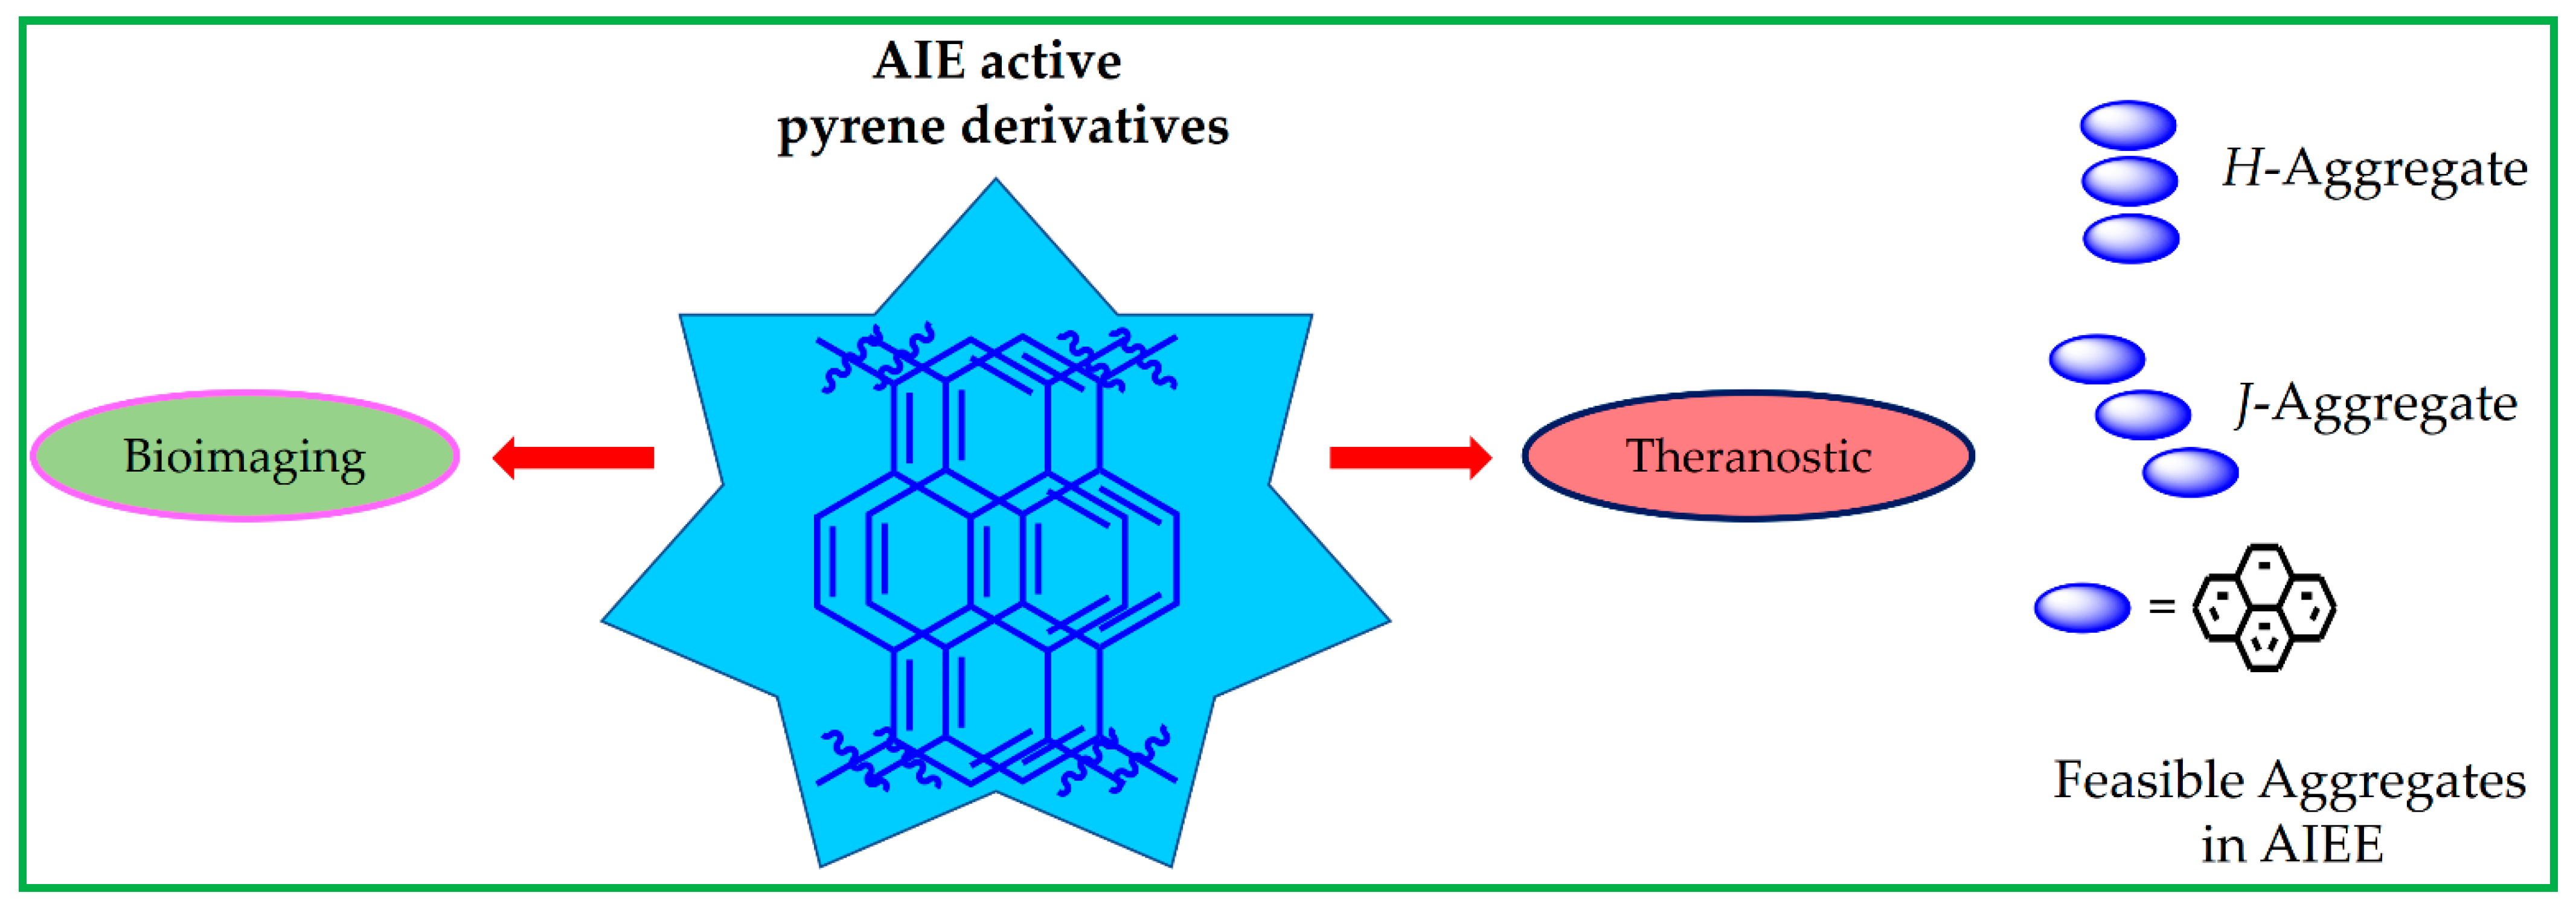 Biosensors | Free Full-Text | Pyrene-Based AIE Active Materials for  Bioimaging and Theranostics Applications